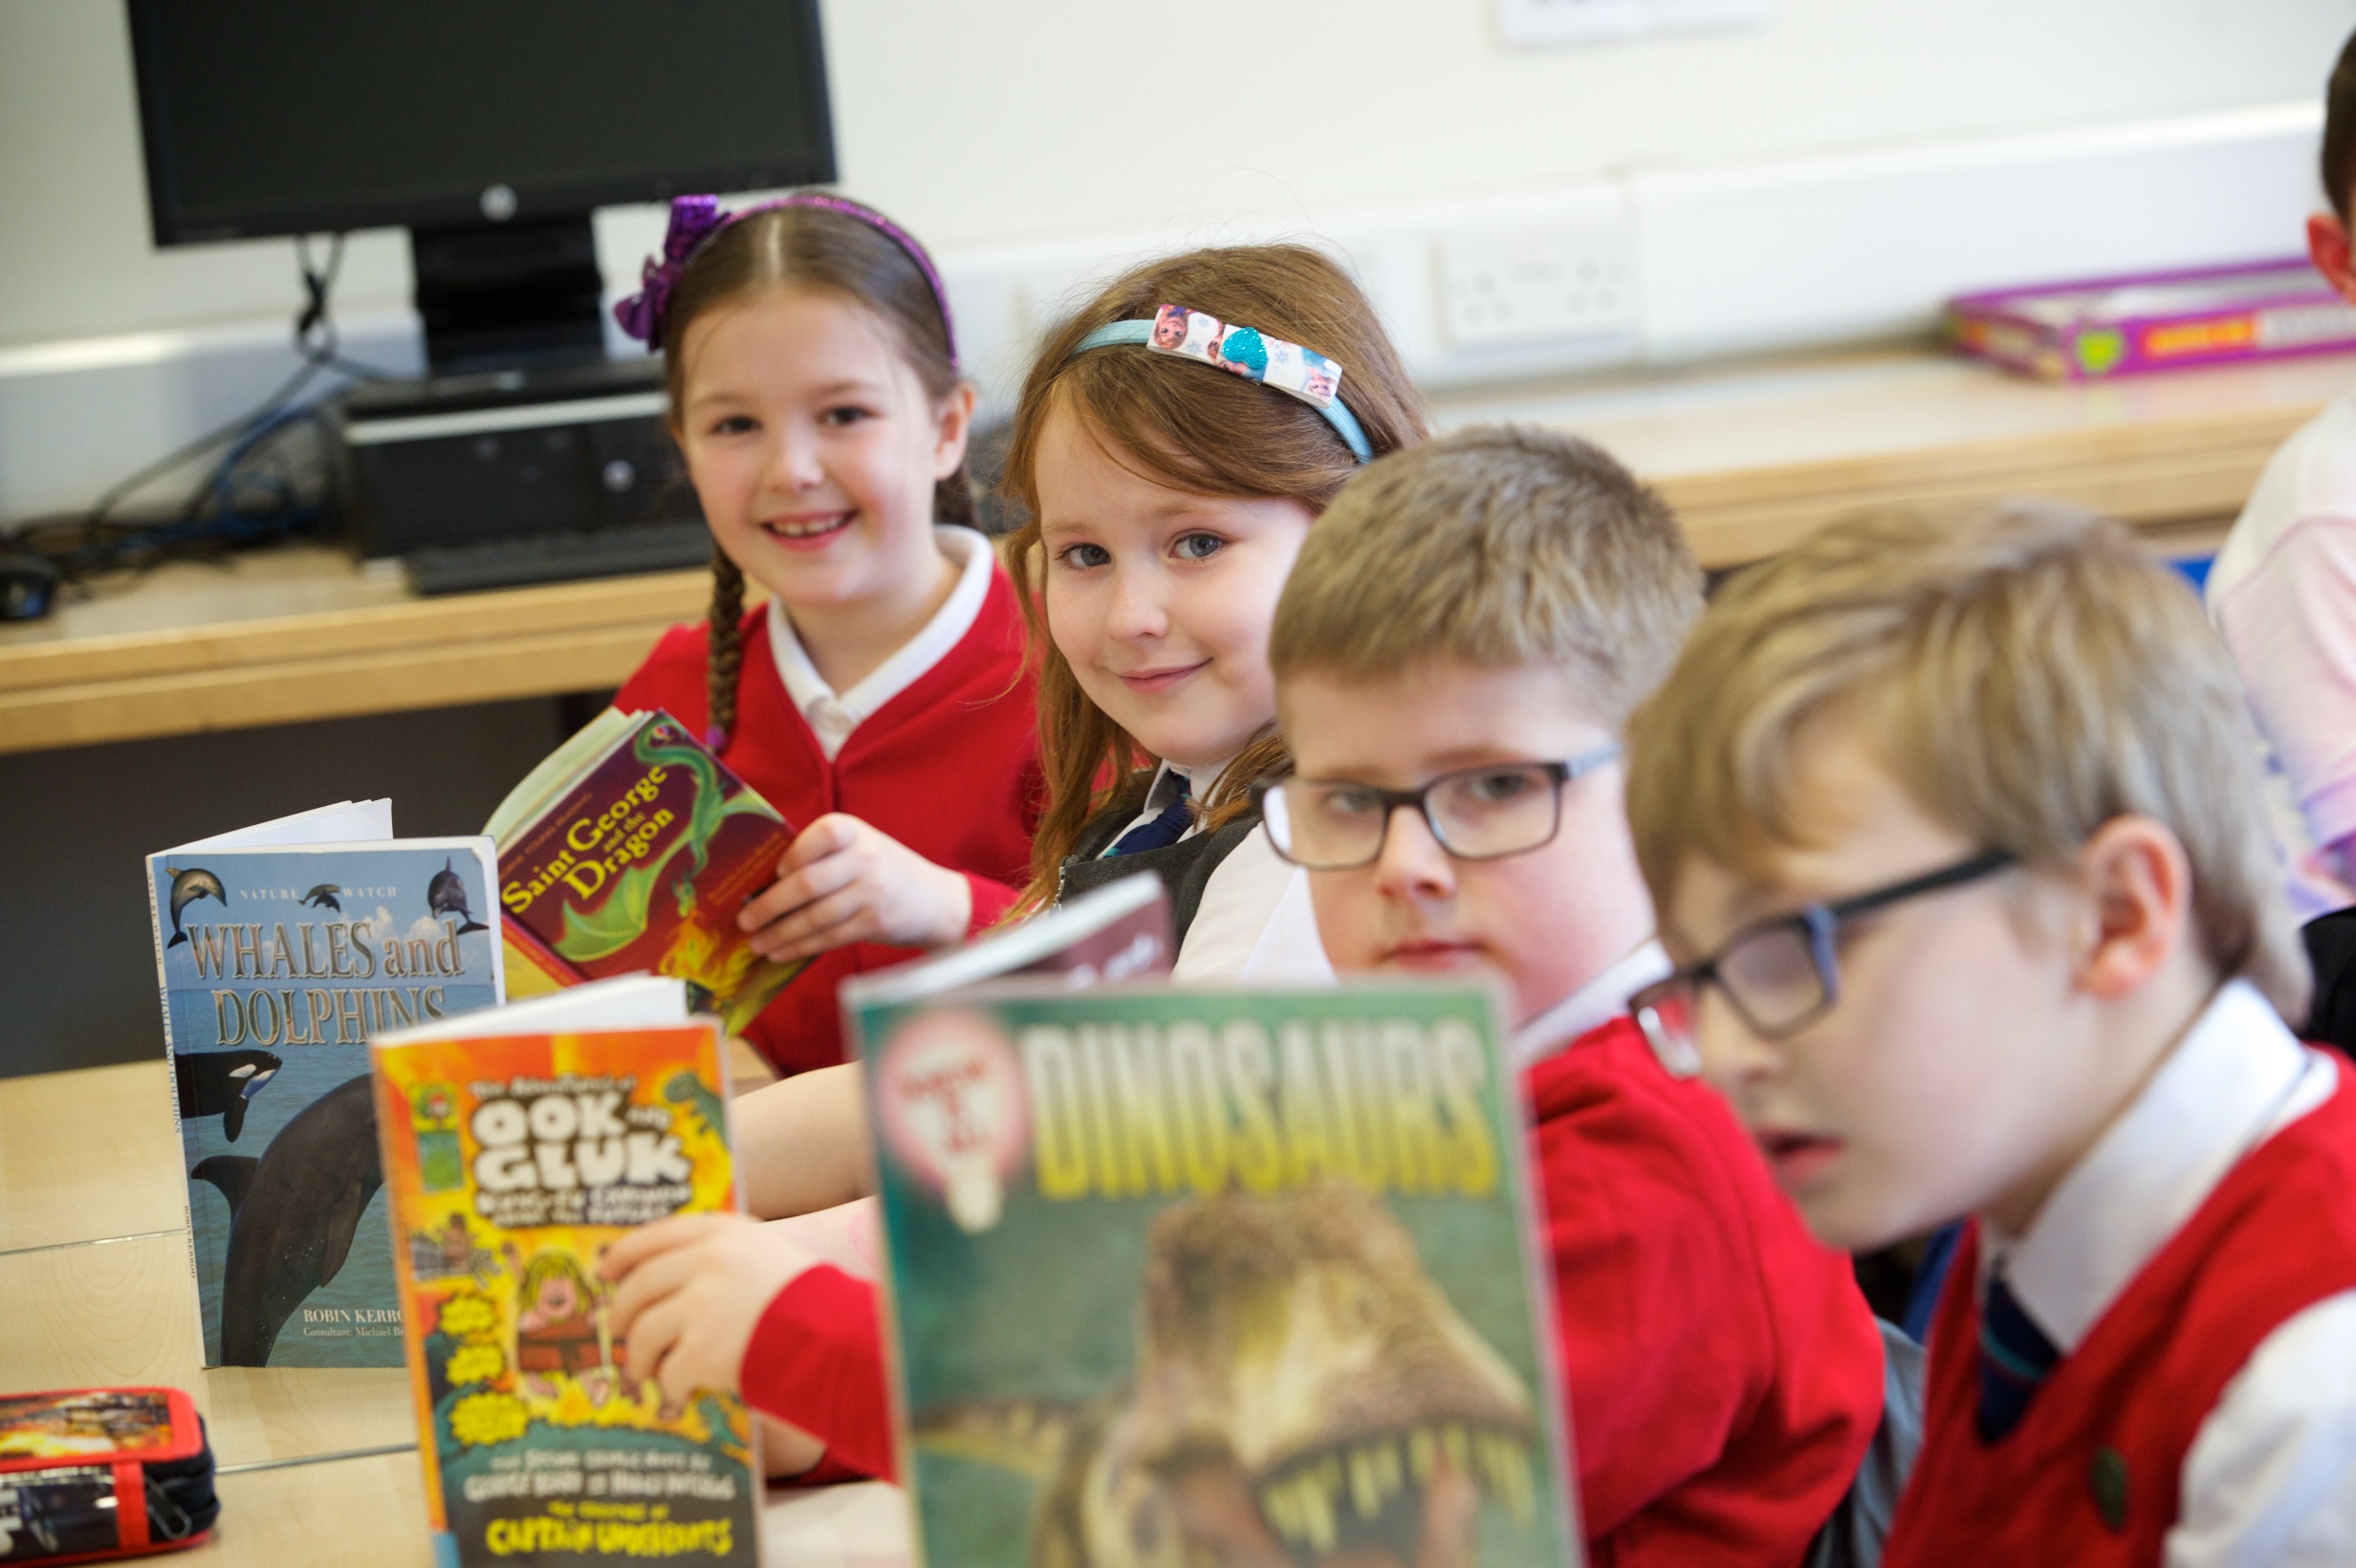 Primary school celebrates storytelling and reading at book festival